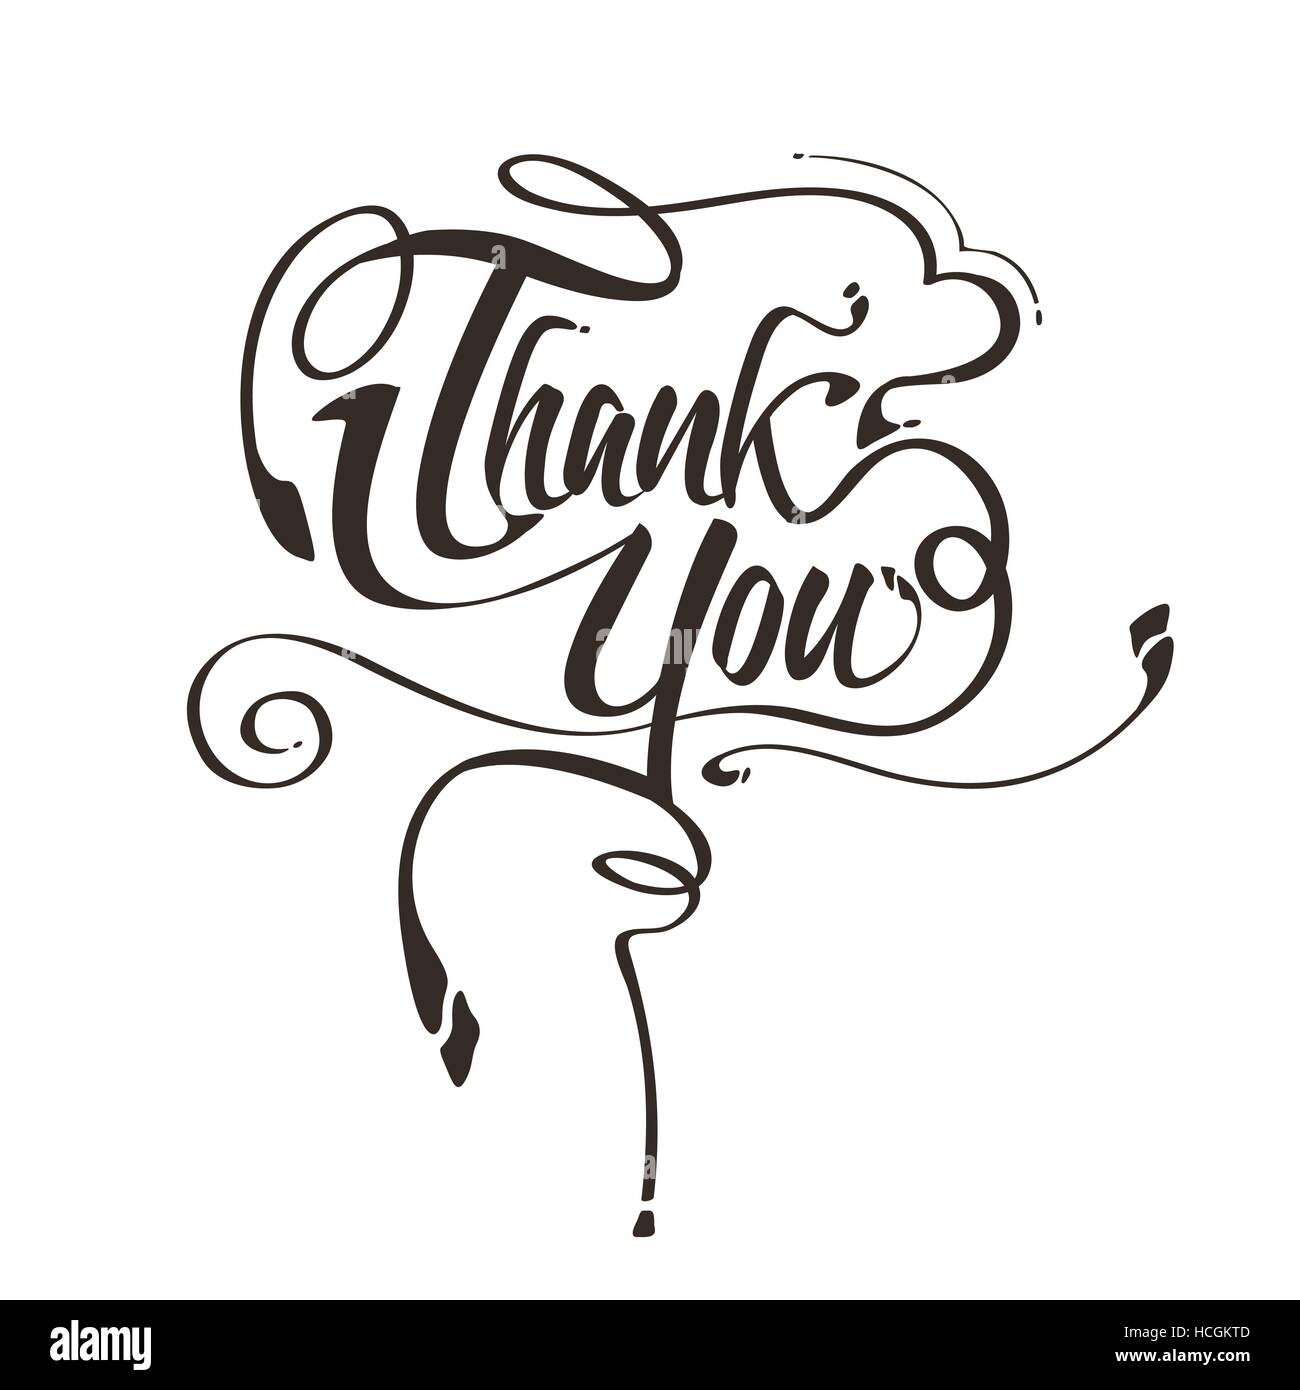 simplicity thank you calligraphy design over white background Stock ...